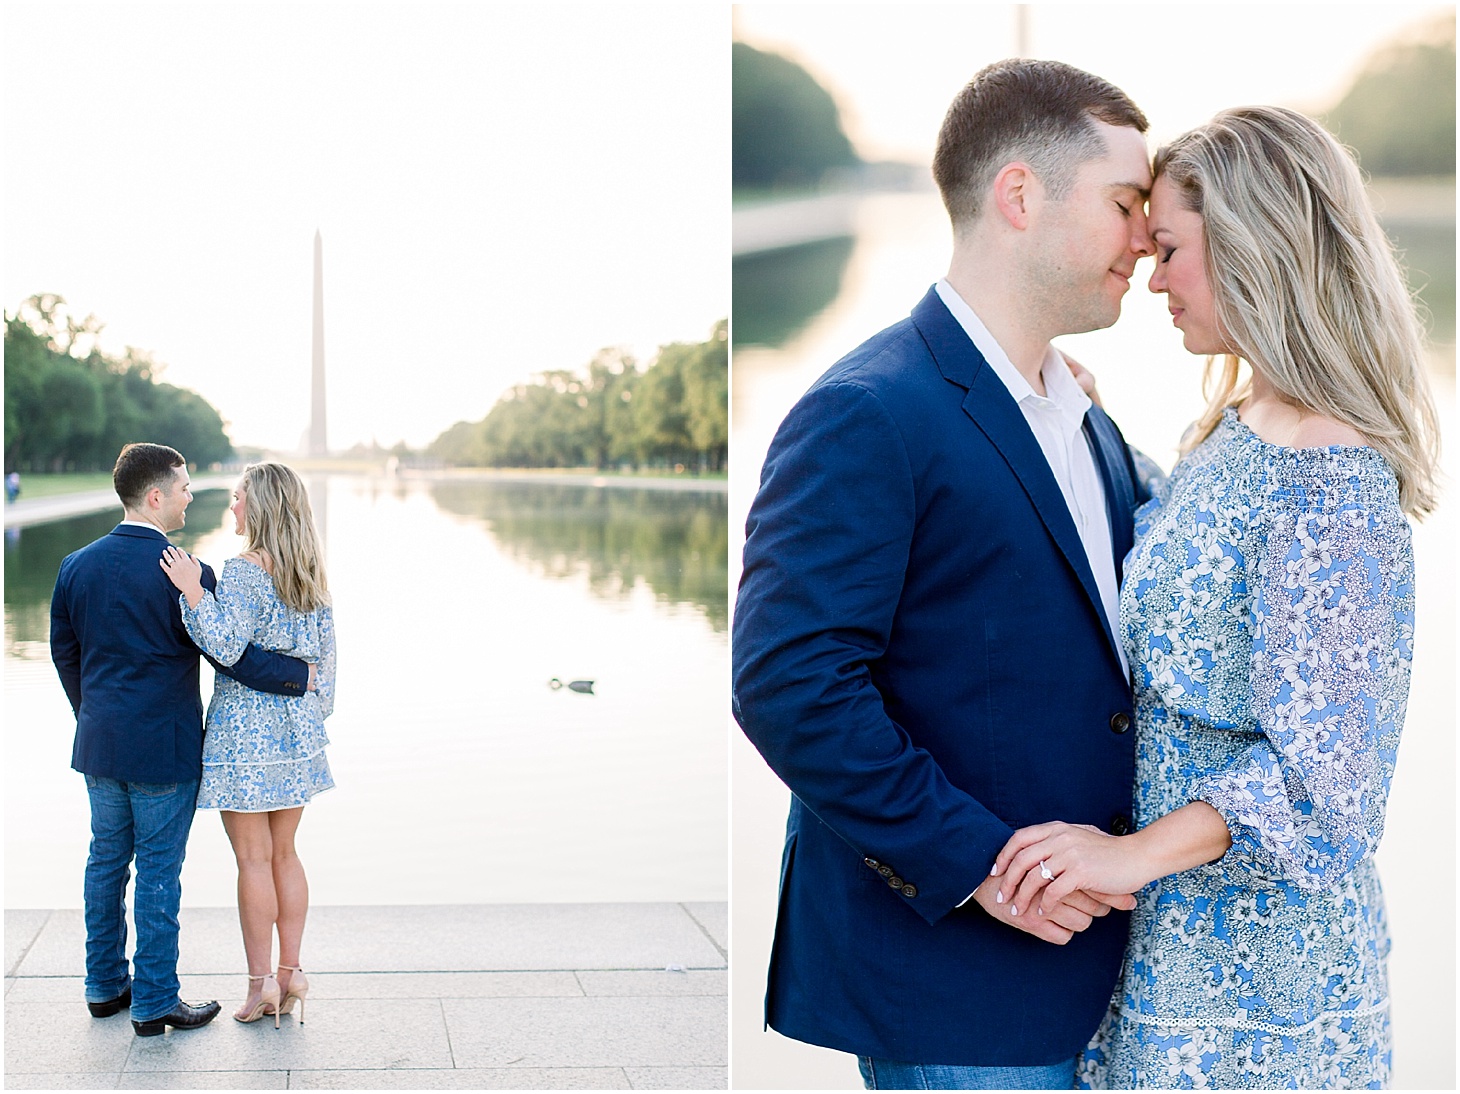 Spring Engagement Portraits at the Lincoln Memorial Reflecting Pool | Sunrise Engagement Session on Capitol Hill | Sarah Bradshaw Photography | DC Wedding Photographer